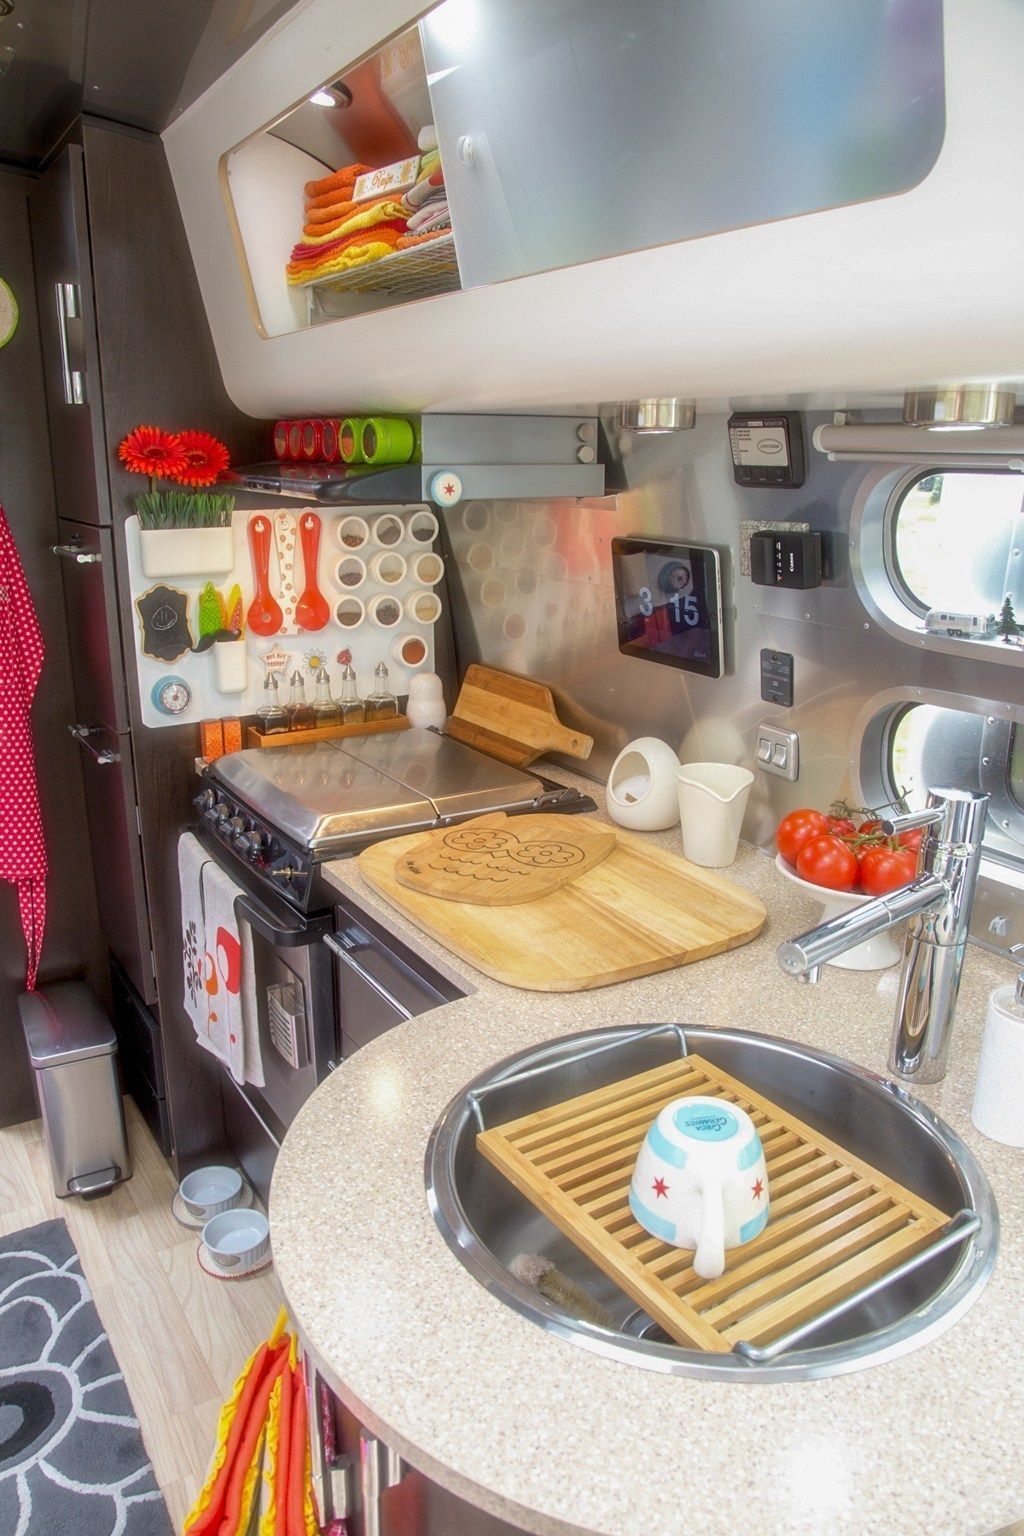 Best RV Kitchen Storage Ideas For Cozy Cook When The Camping 31